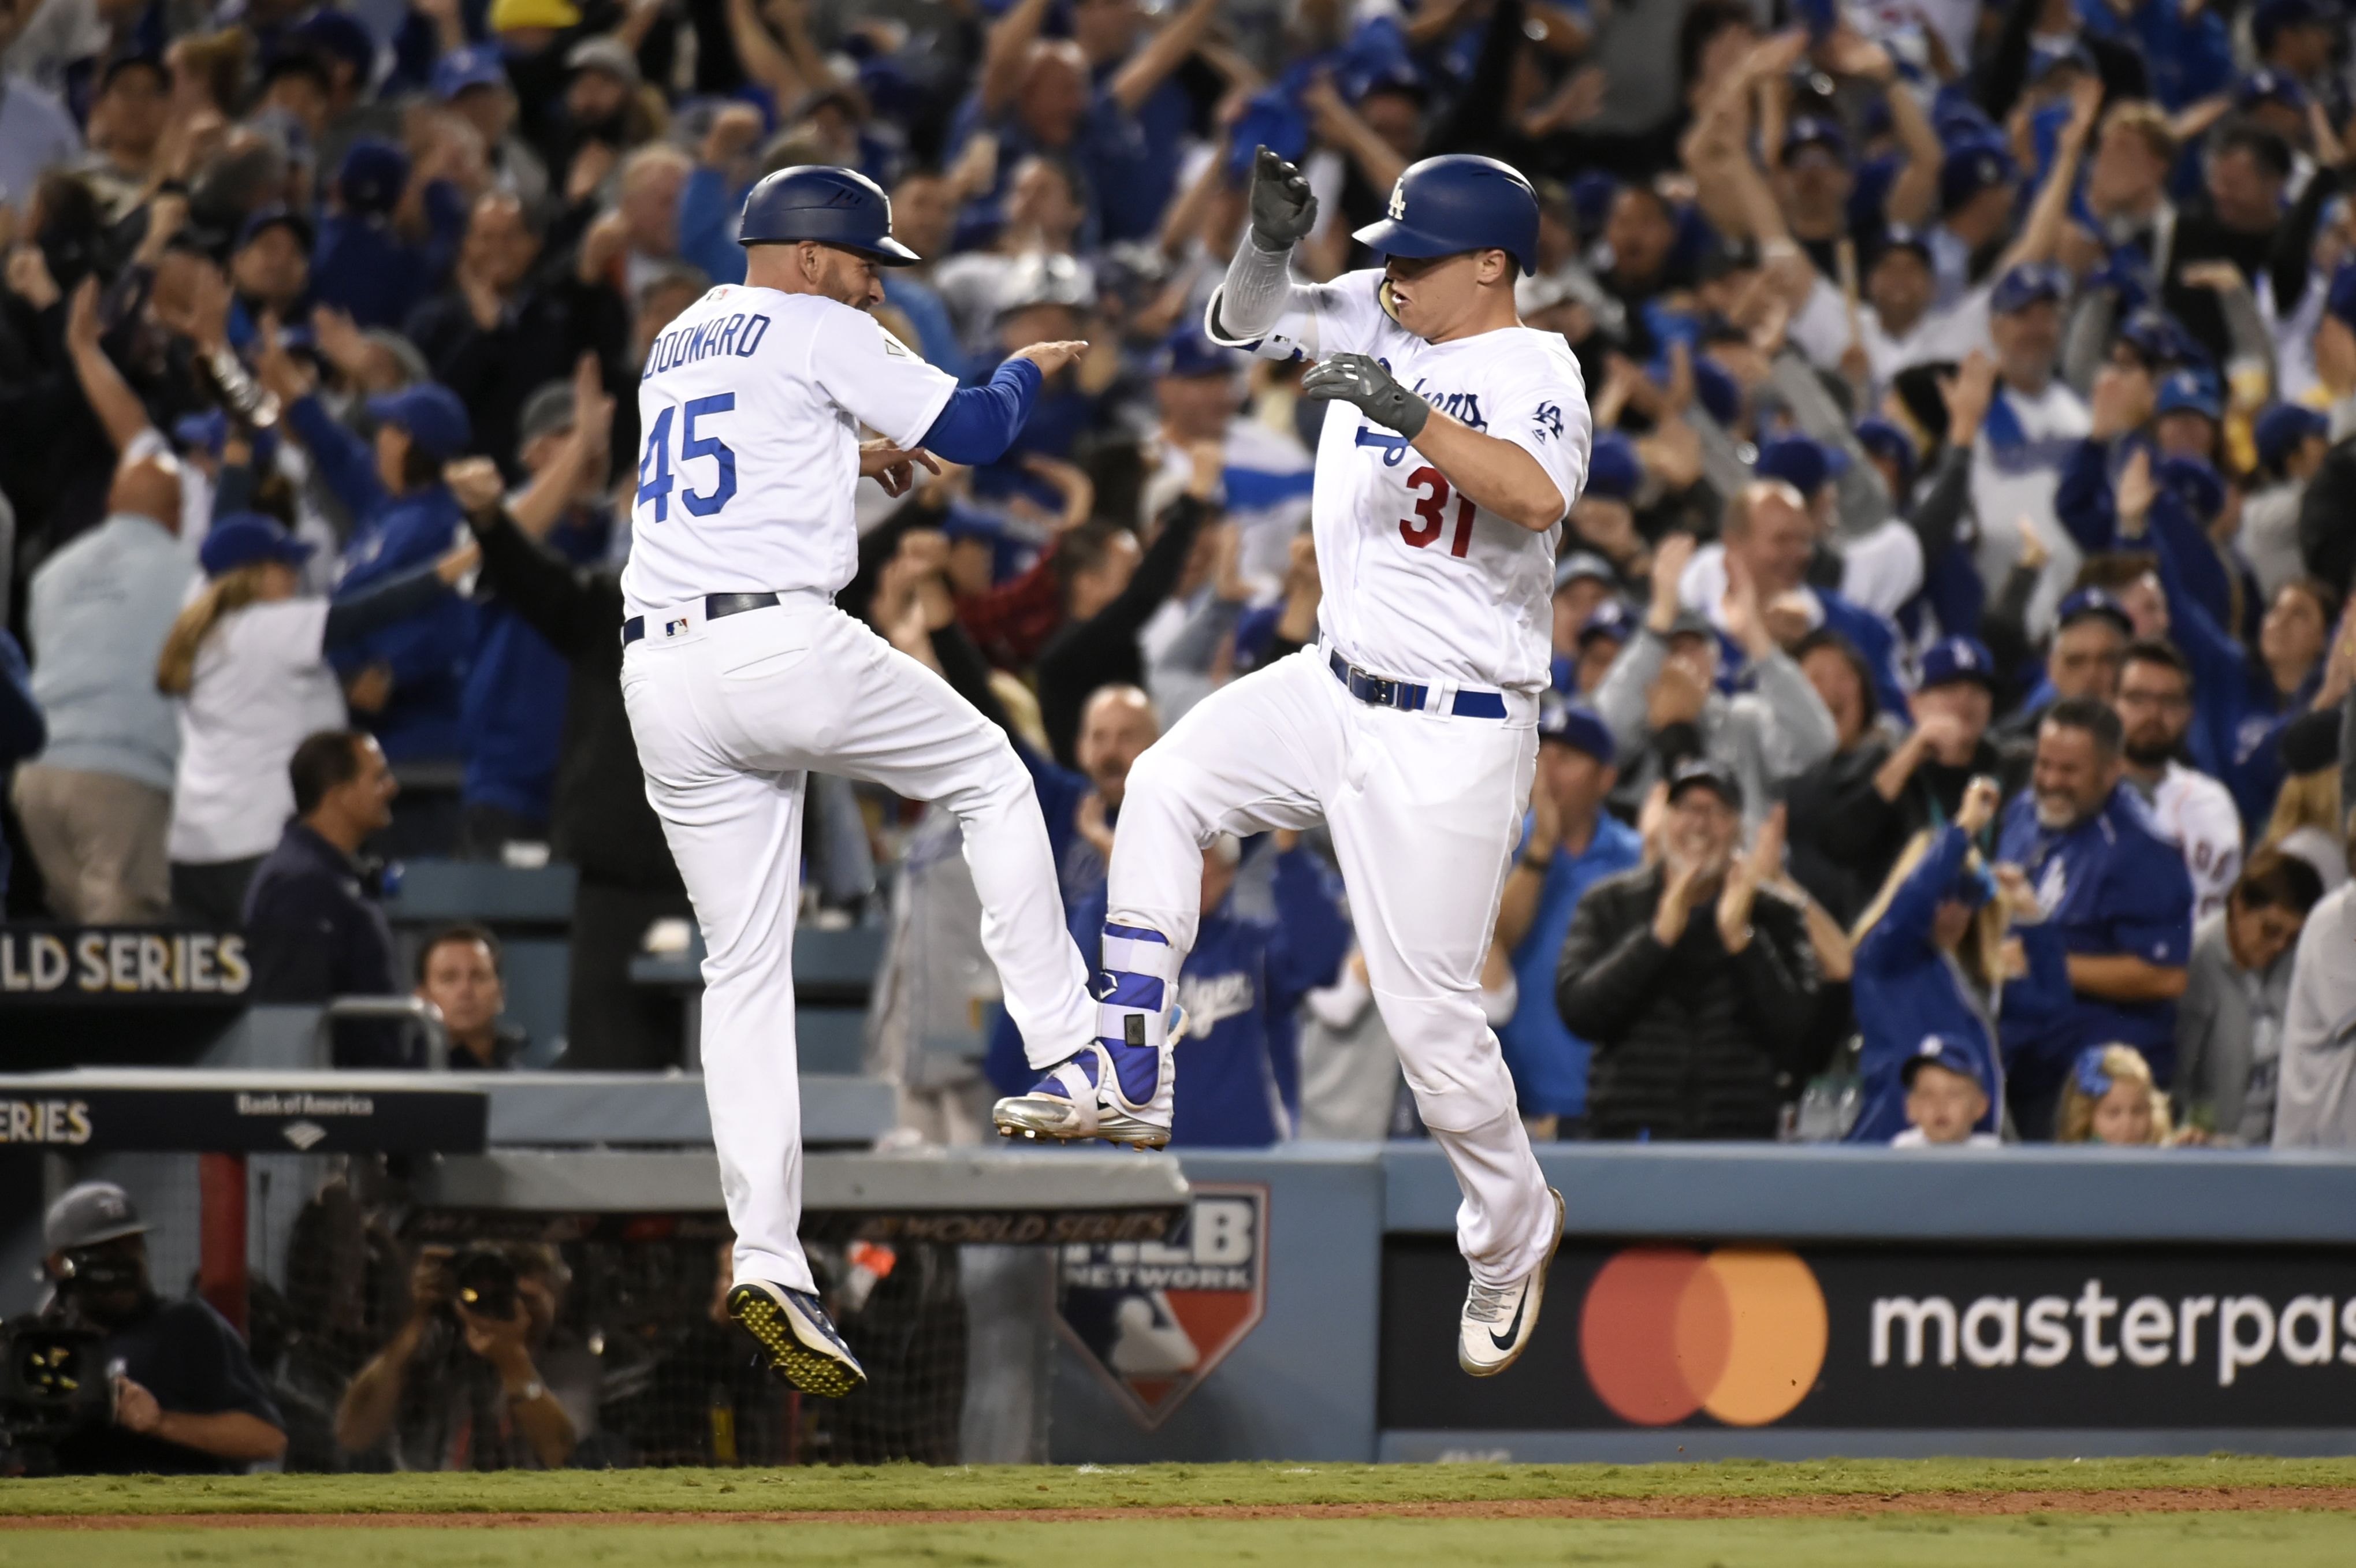 Highlights and runs: Detroit Tigers 4-2 Los Angeles Dodgers in MLB